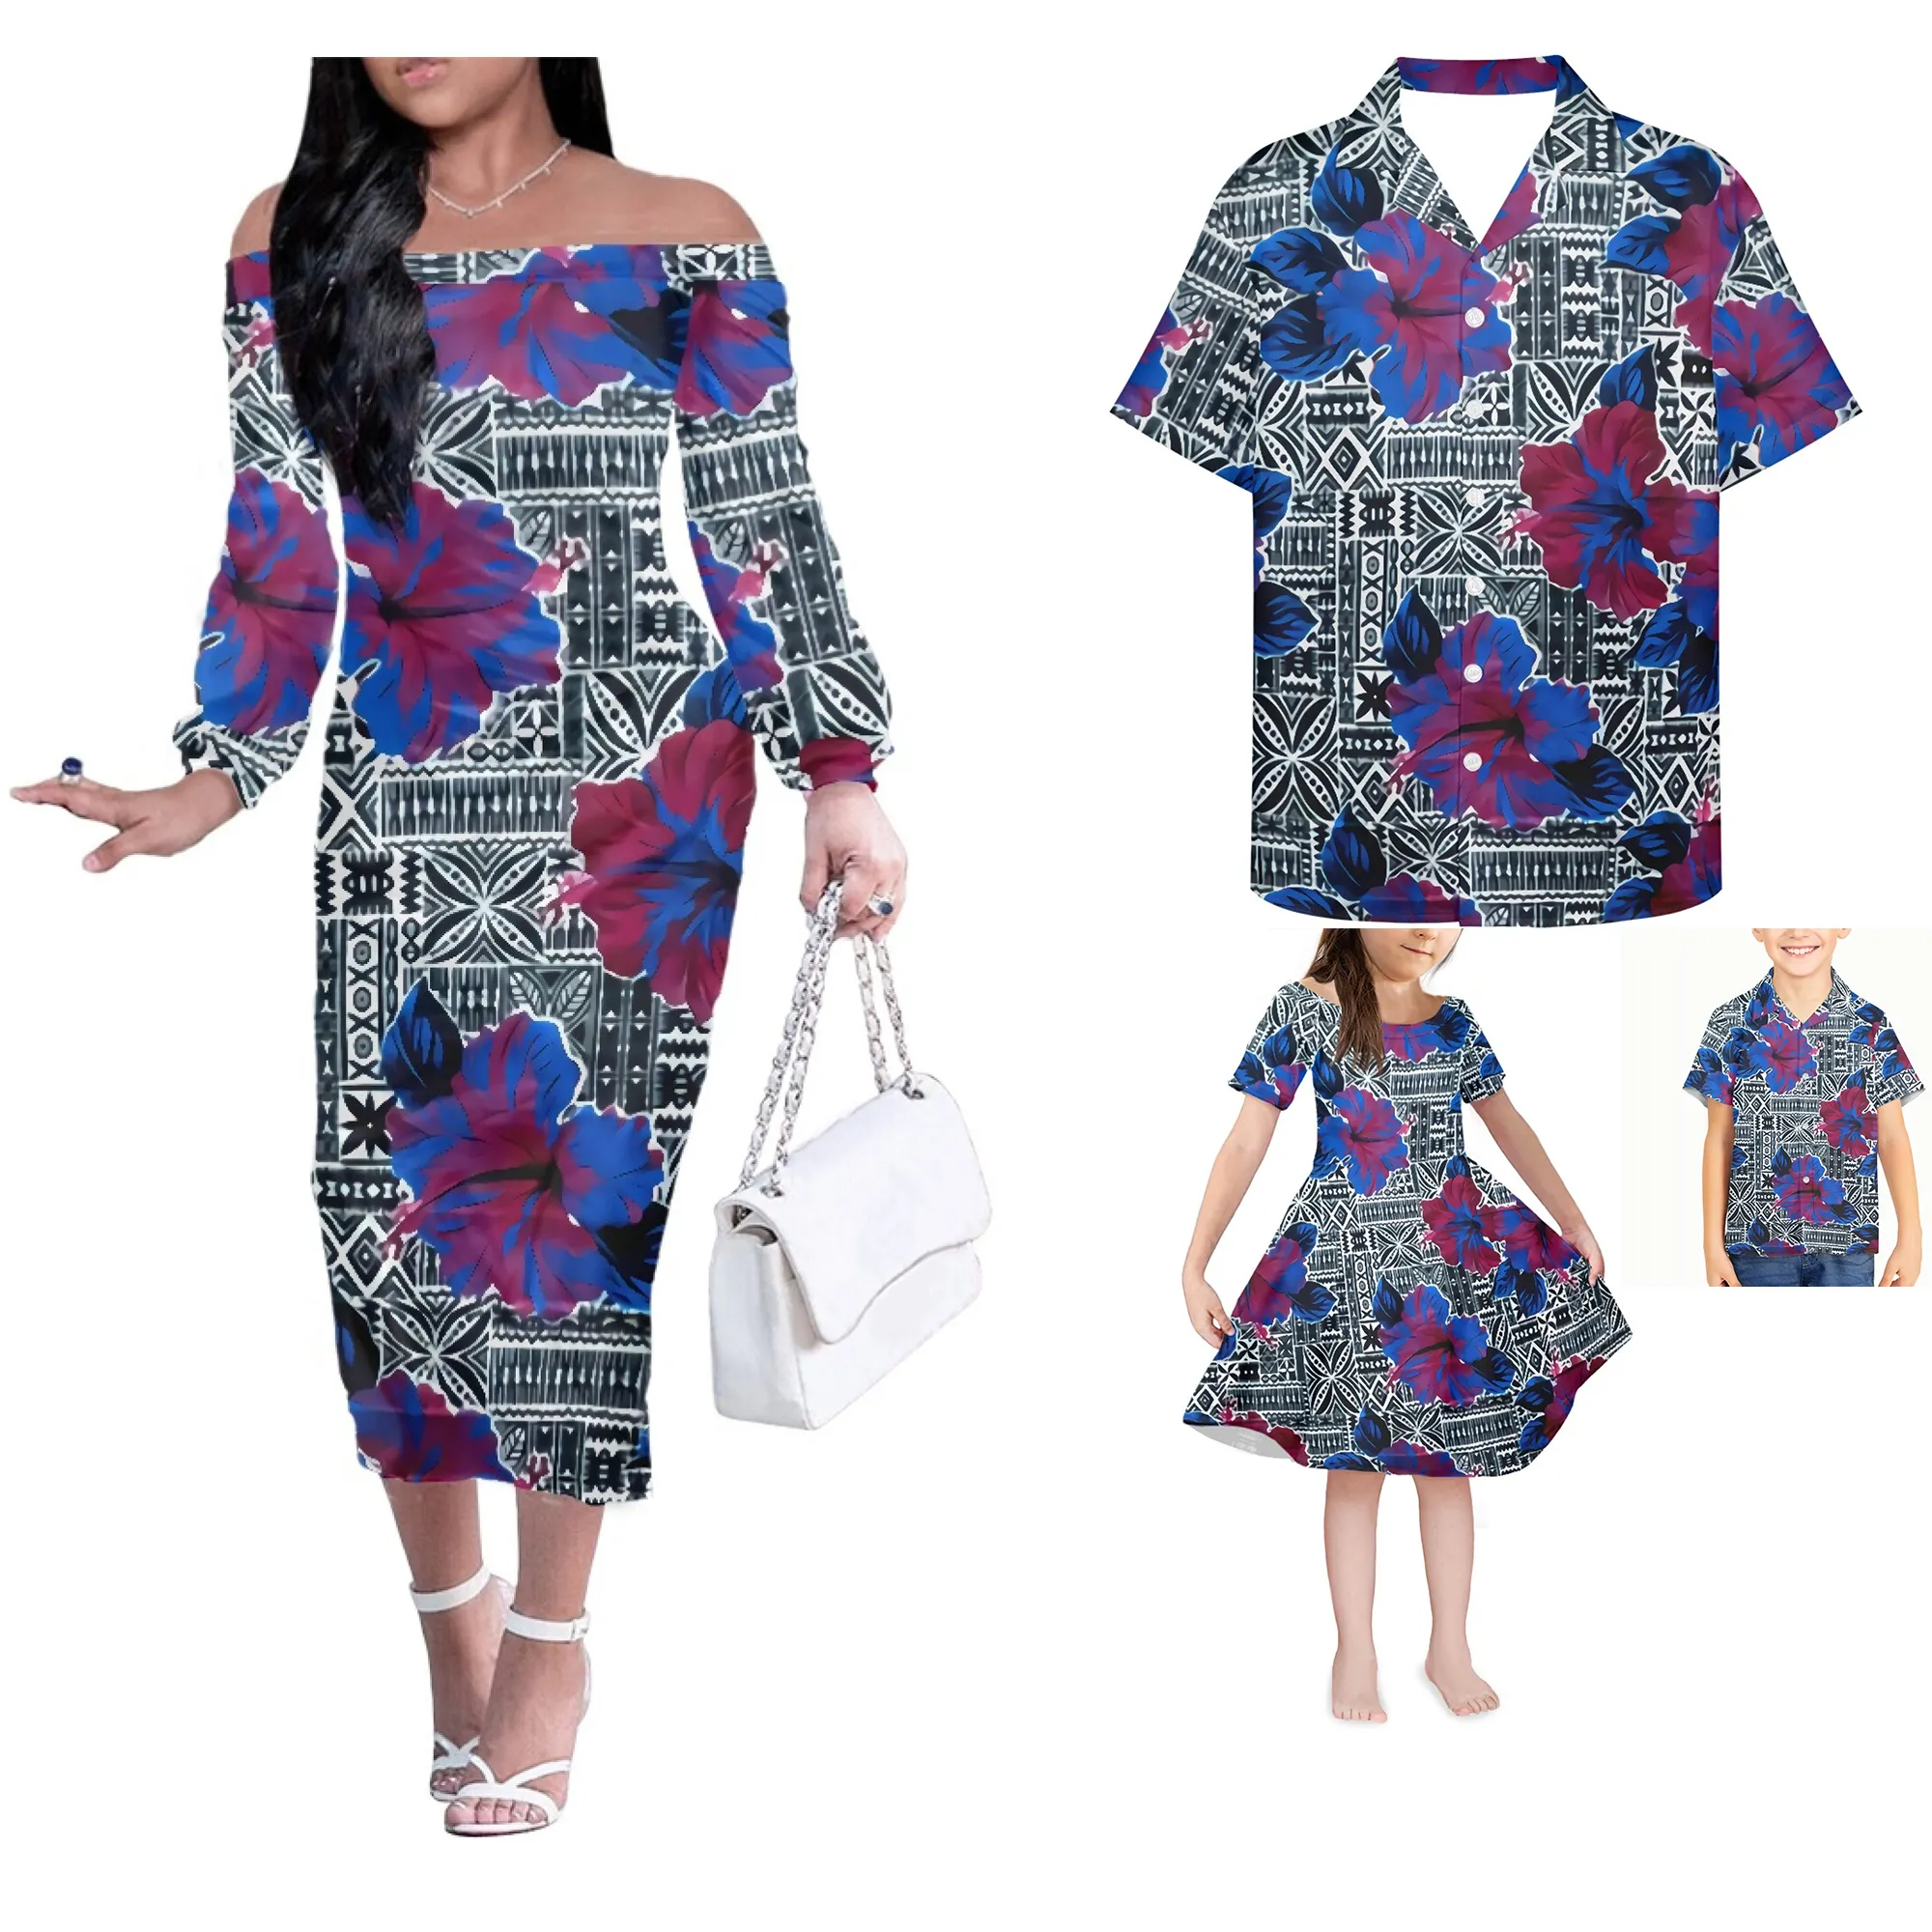 Party Ball Family Collection new suit hot women's sexy shoulder off fashion dress matching men's casual Hawaiian shirt and child